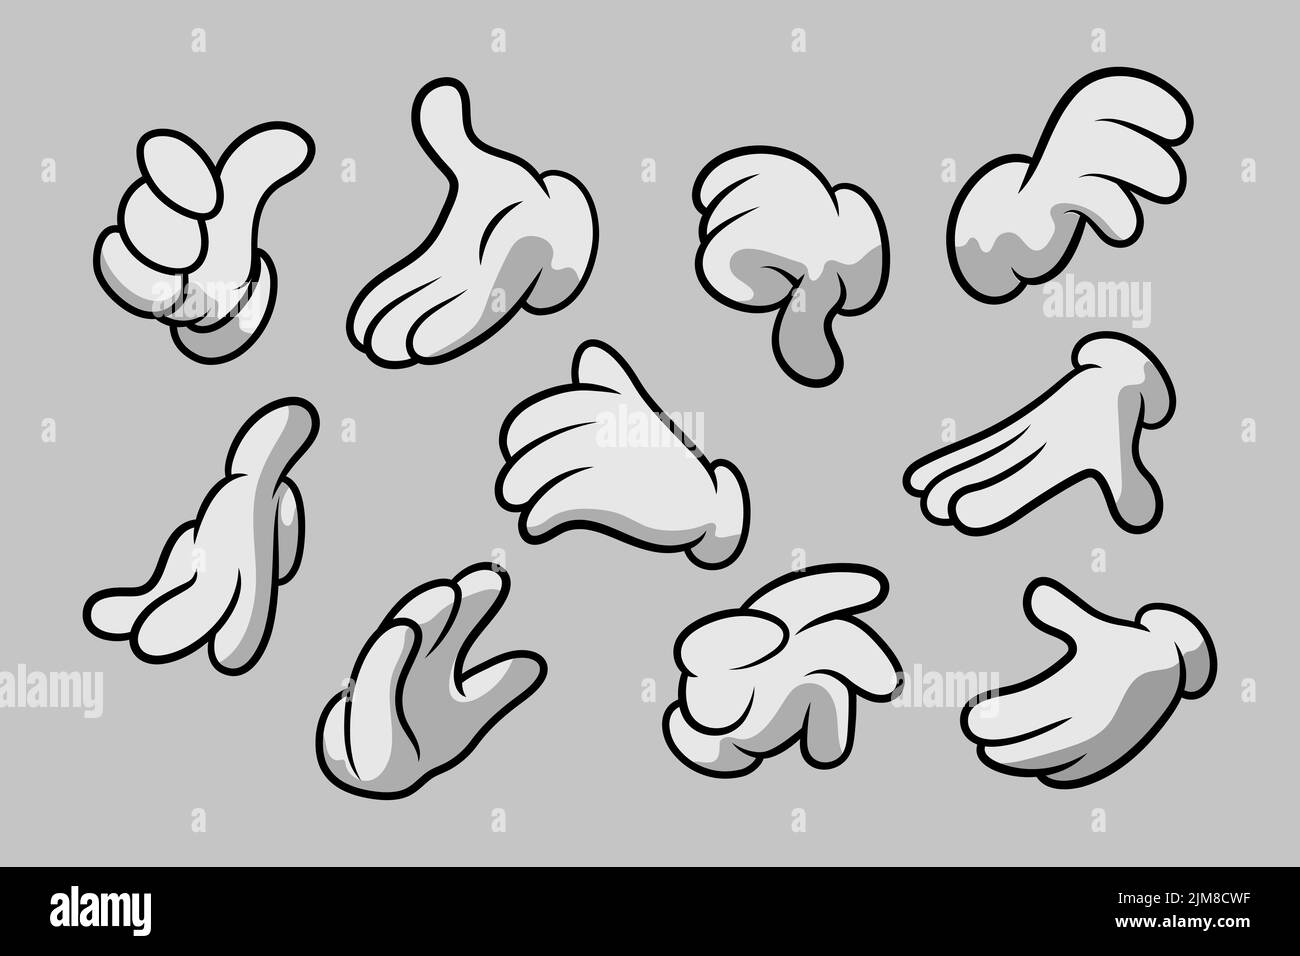 Retro Cartoon Gloved Hands Gestures. Cartoon Hands with Gloves Icon Set Isolated. Vector Clipart - Parts of Body, Arms in White Gloves. Hand Gesture Stock Vector